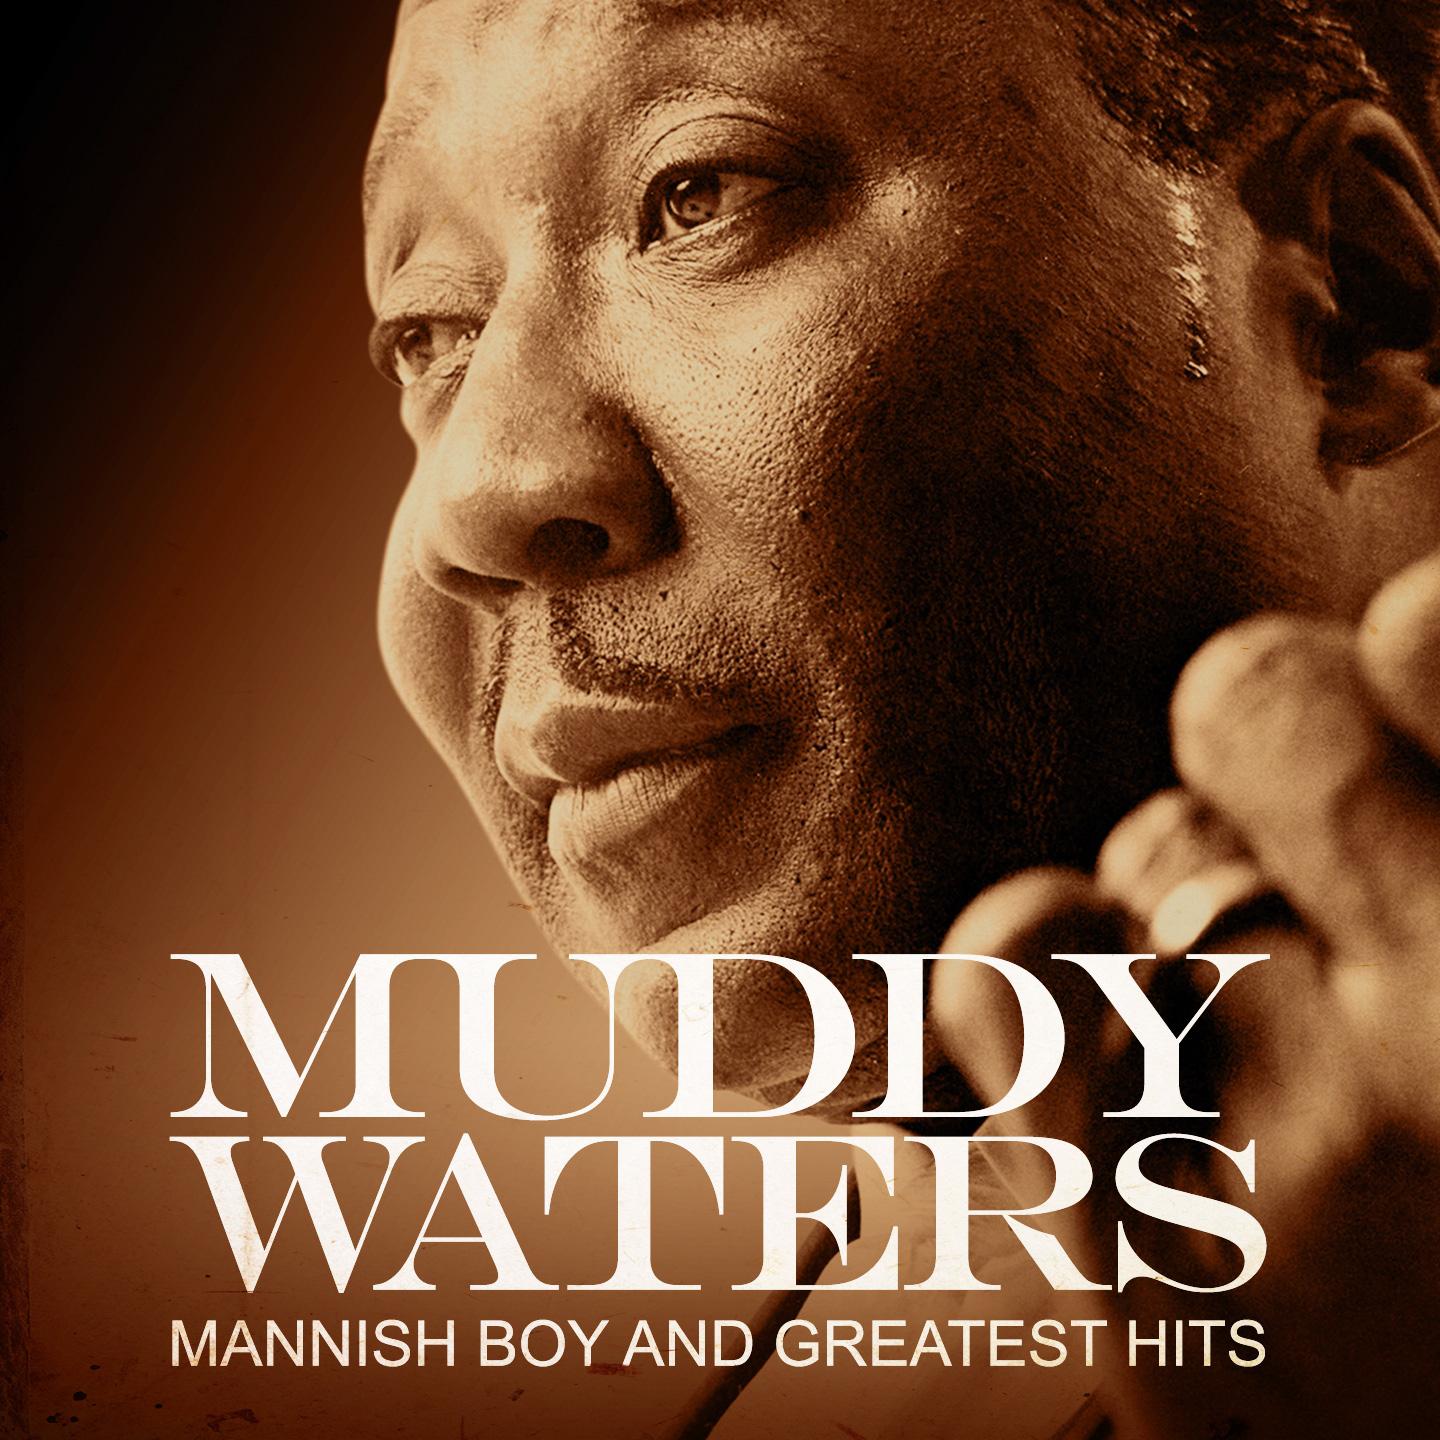 Muddy Waters: Mannish Boy and Greatest Hits